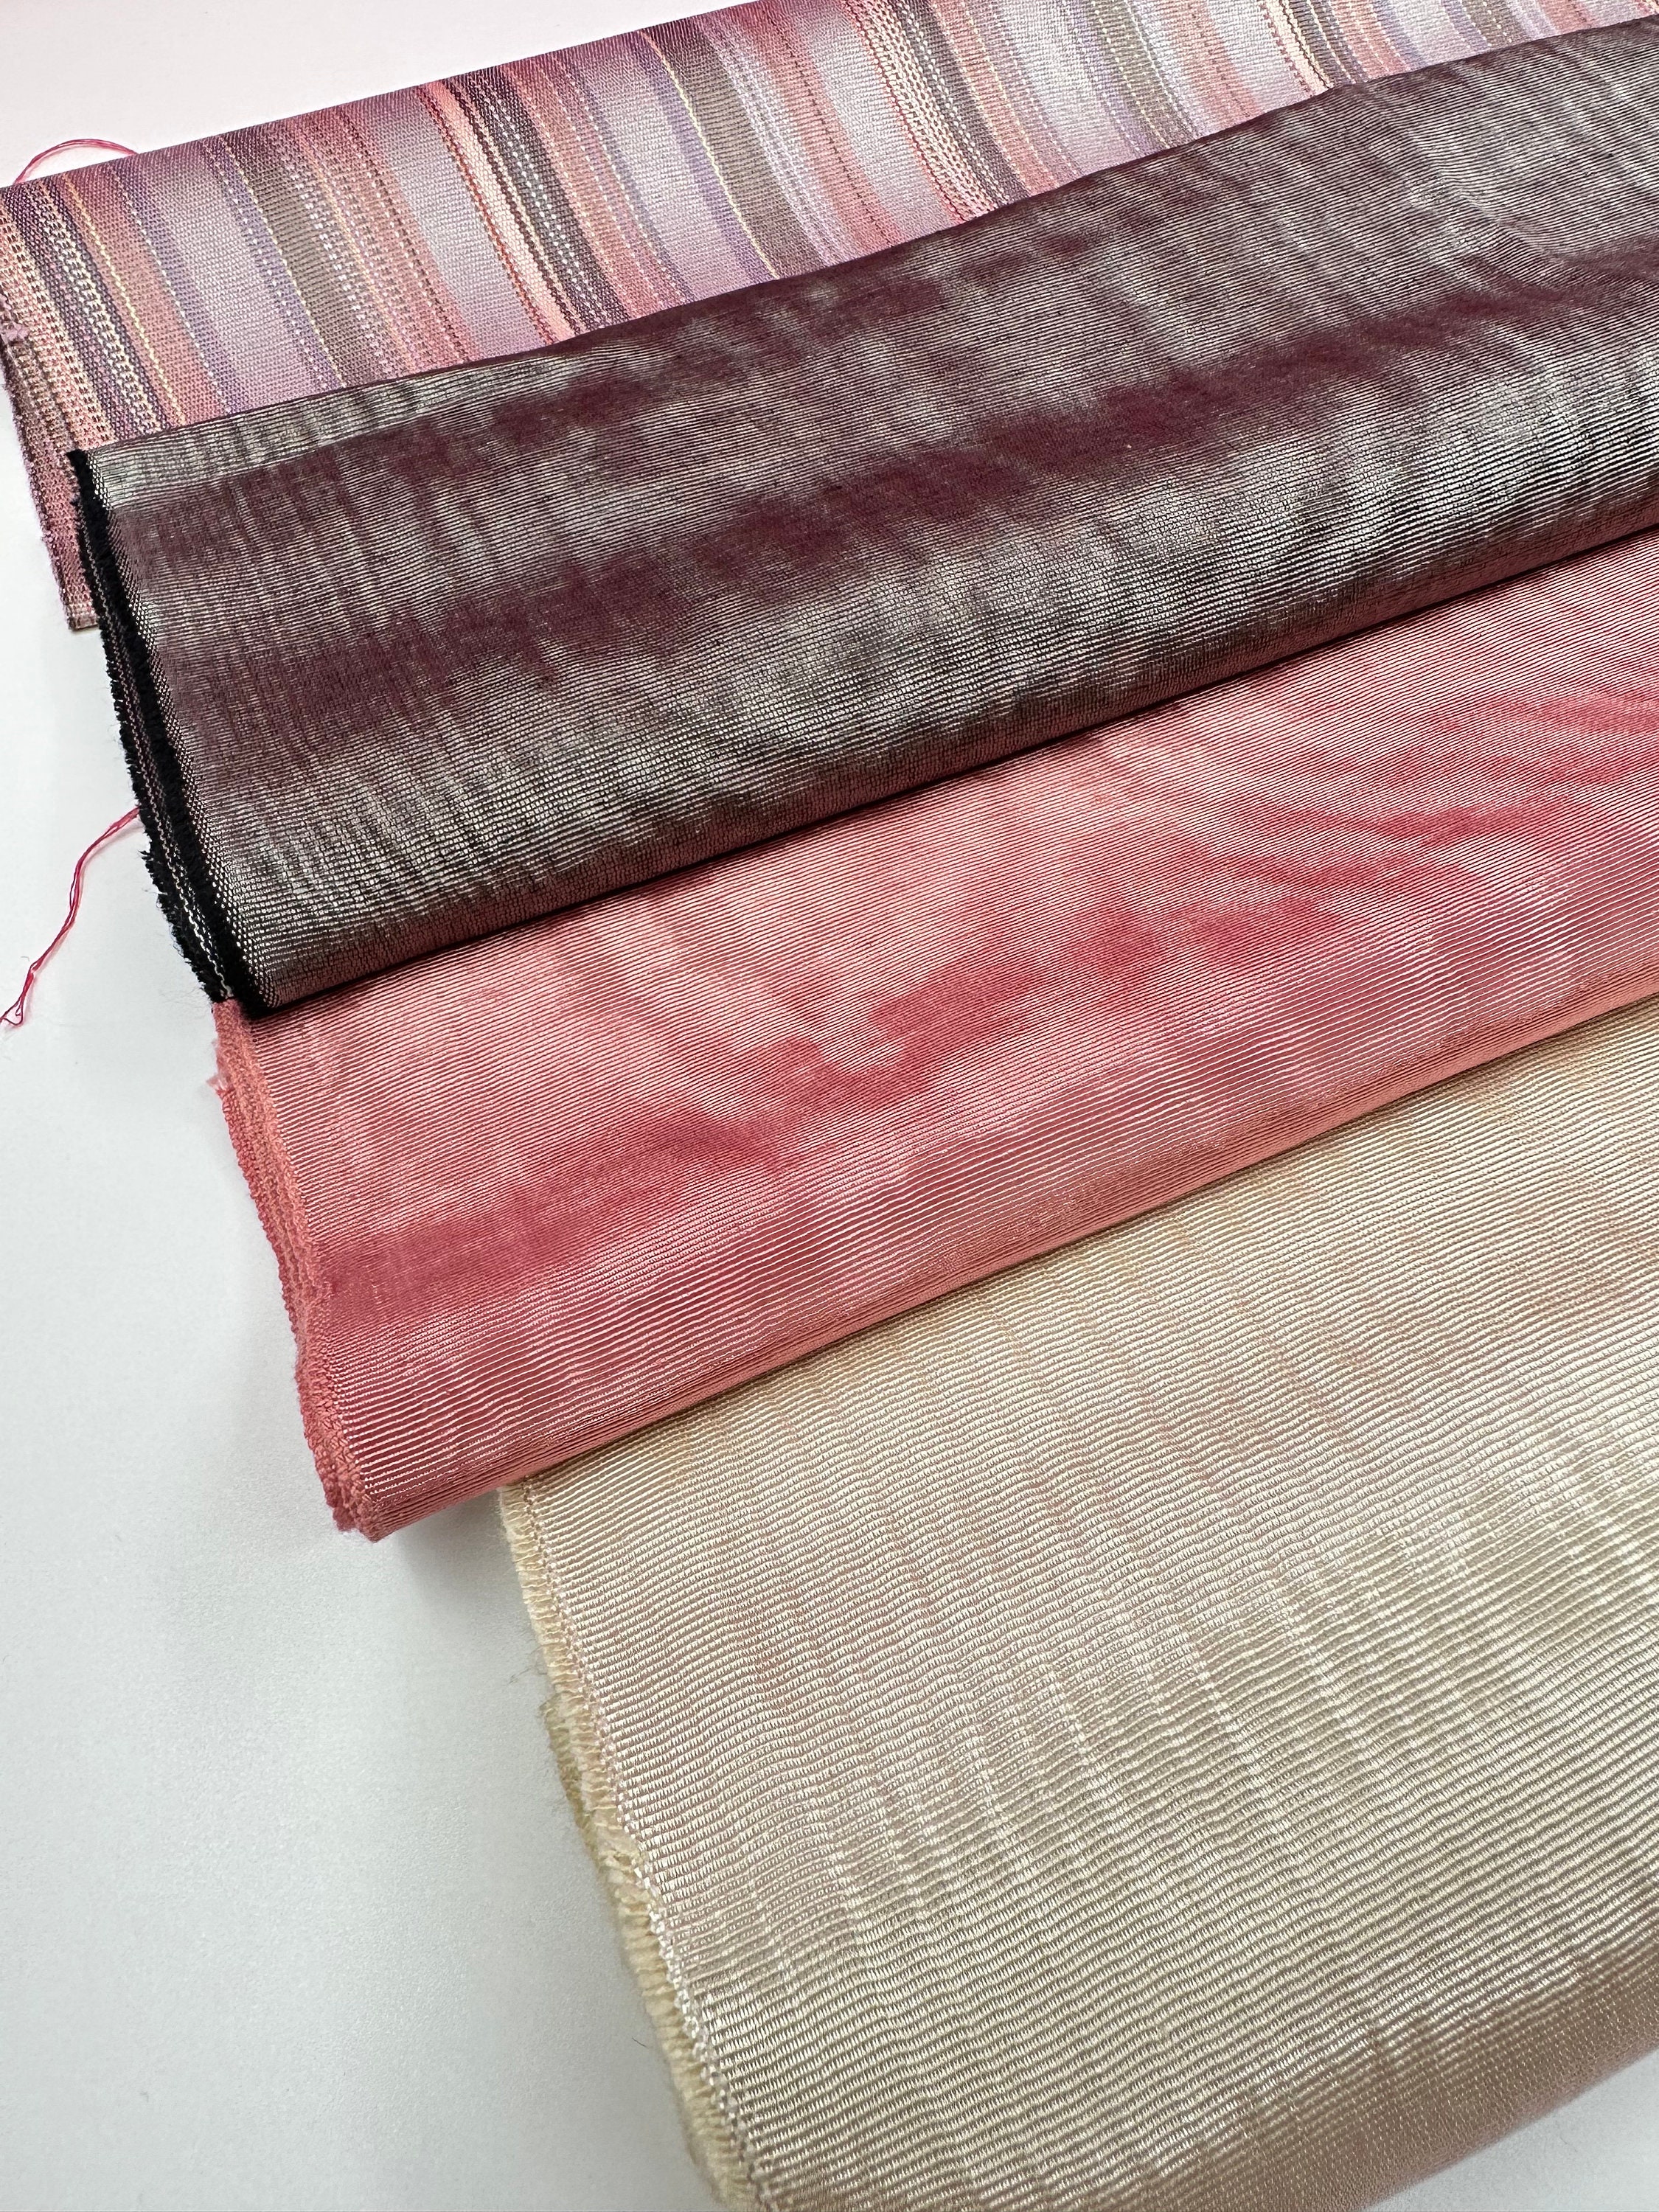 Ecru Silk Moire Fabric, Upholstery and Sewing Fabric by the Yard or Meter.  Special Weaves From Anatolian Heritages. 